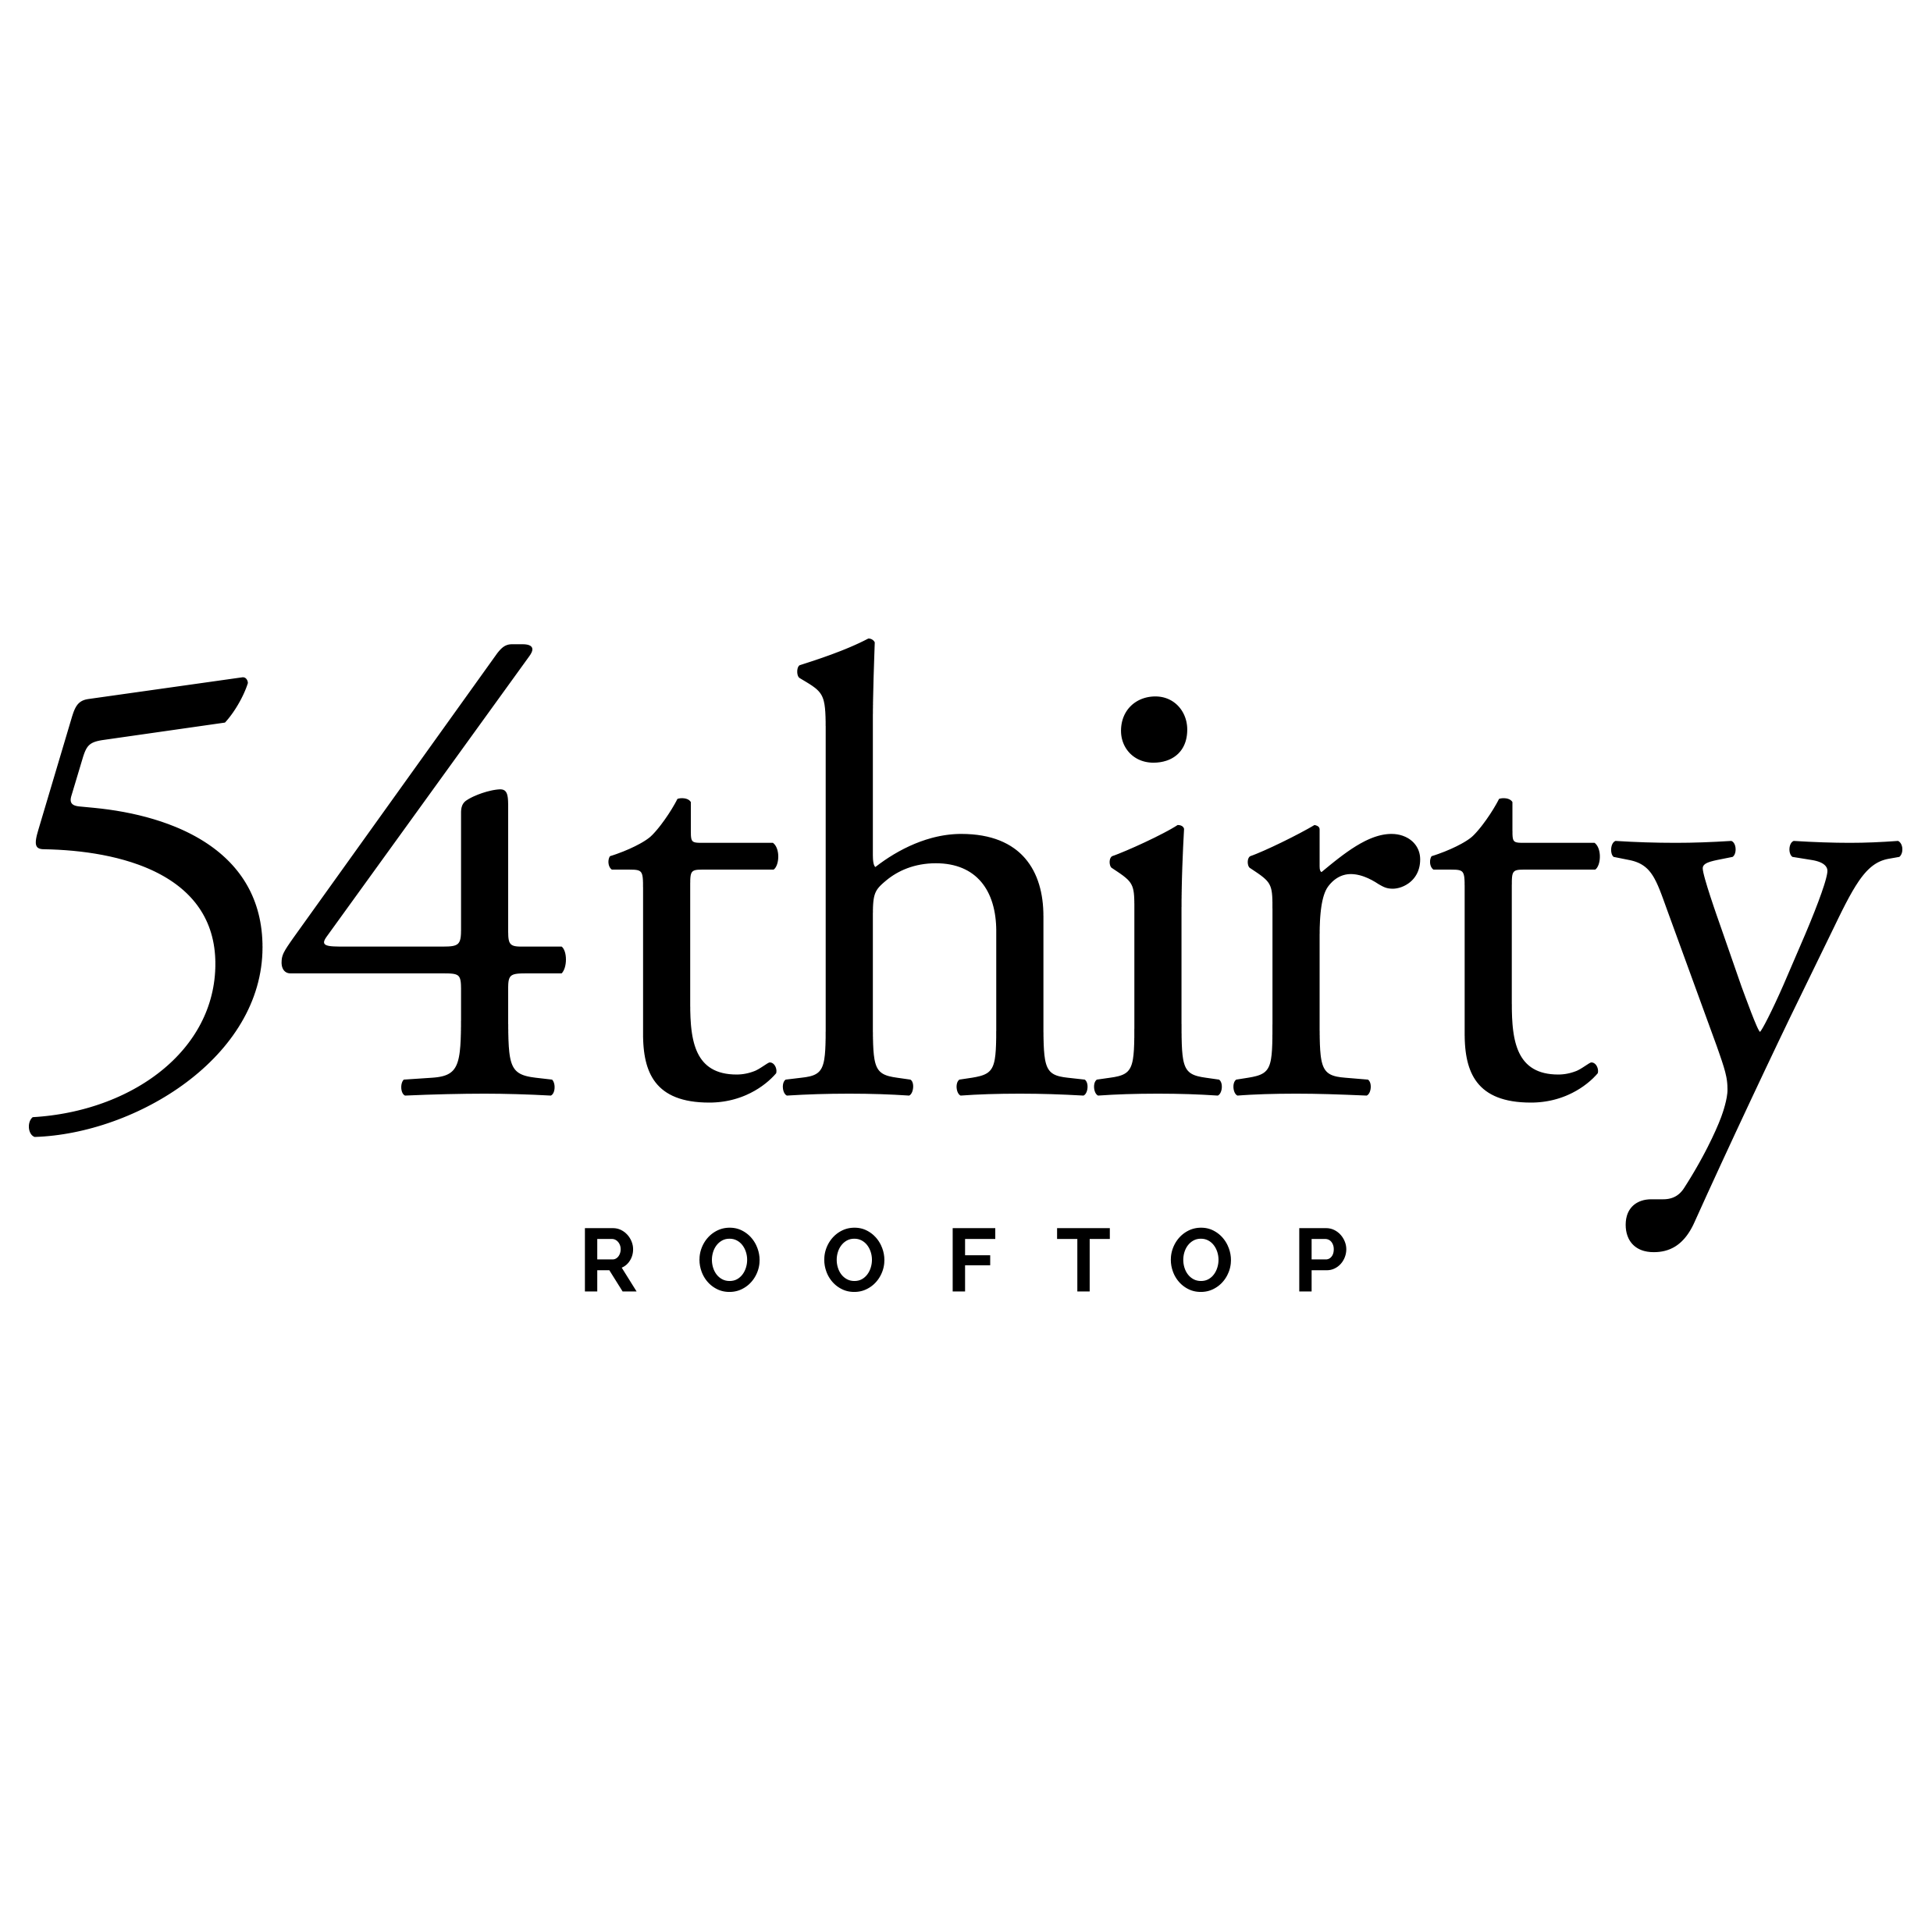 54thirty Rooftop Photo